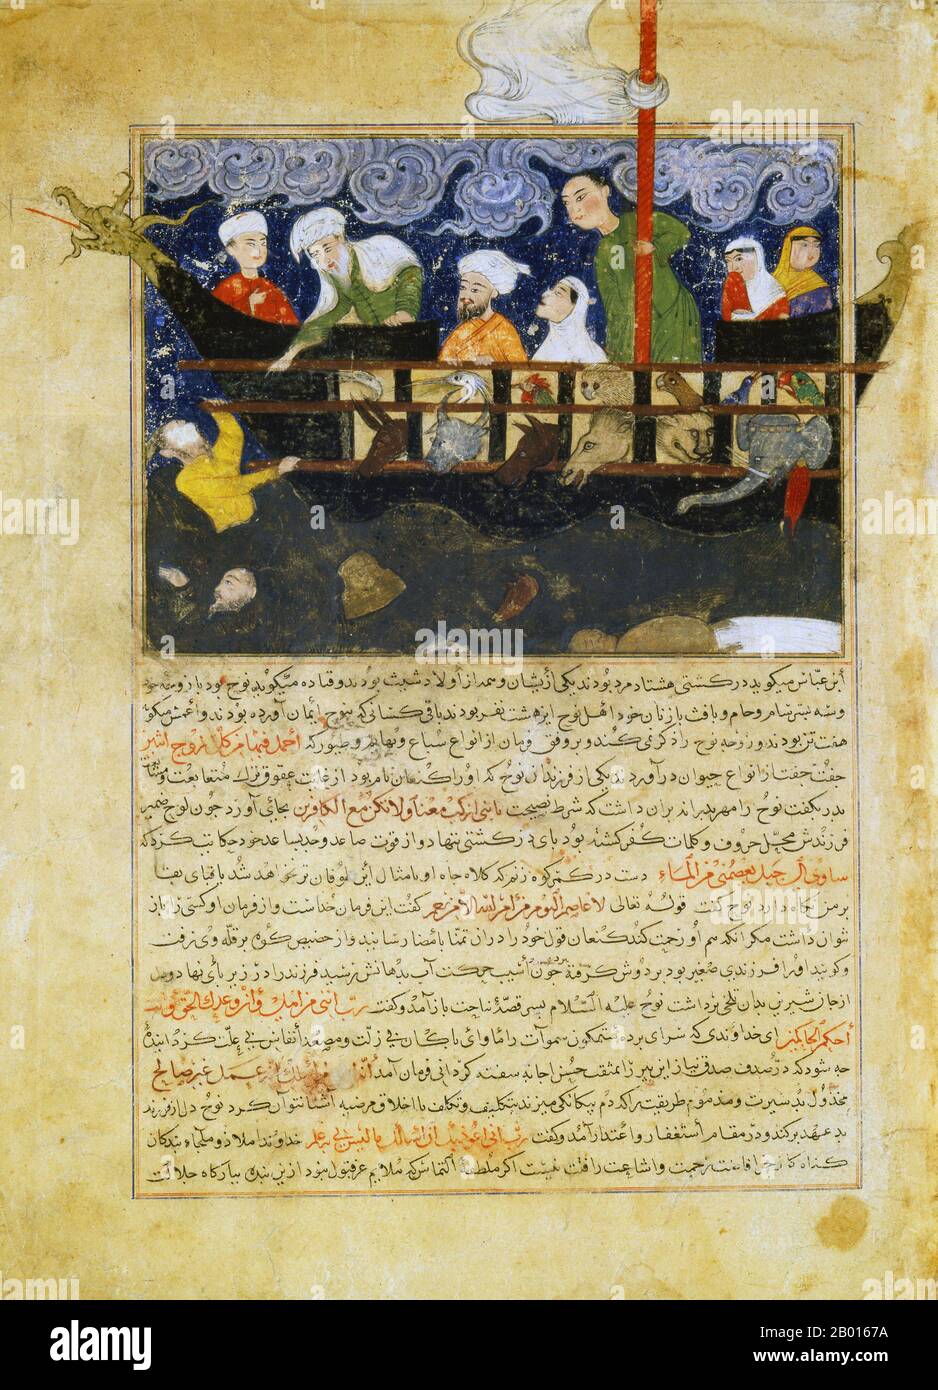 Afghanistan: Miniature painting of Noah's Ark, from Hafiz-i Abru’s Majma al-tawarikh, c. 1425.  Timur’s son Shah Rukh (1405-1447) ordered the historian Hafiz-i Abru to write a continuation of Rashid al-Din’s famous history of the world, Jami al-tawarikh. Like the Il-Khanids, the Timurid Dynasty was concerned with legitimising their right to reign, and Hafiz-i Abru’s “A Collection of Histories” covers a period that included the time of Shah Rukh himself. Stock Photo